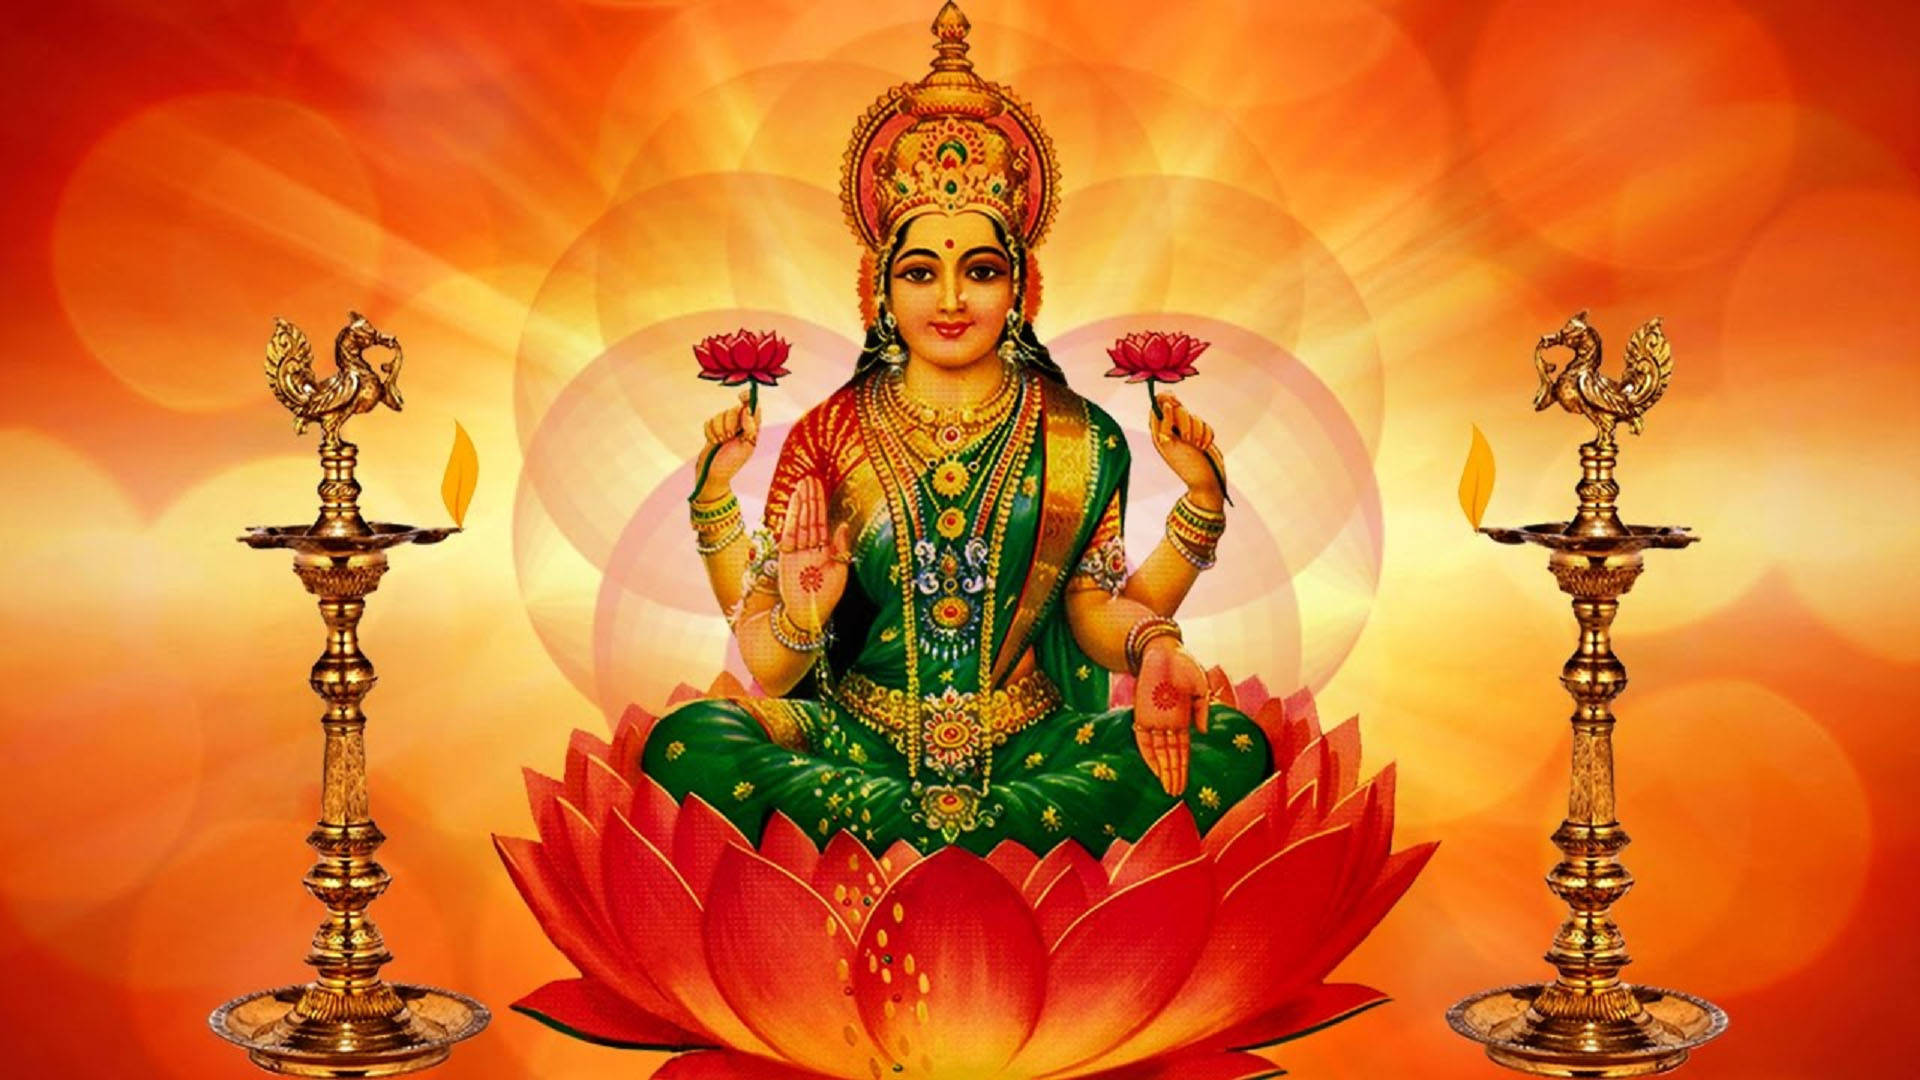 Lakshmi Devi Seated Between Two Lamps Background